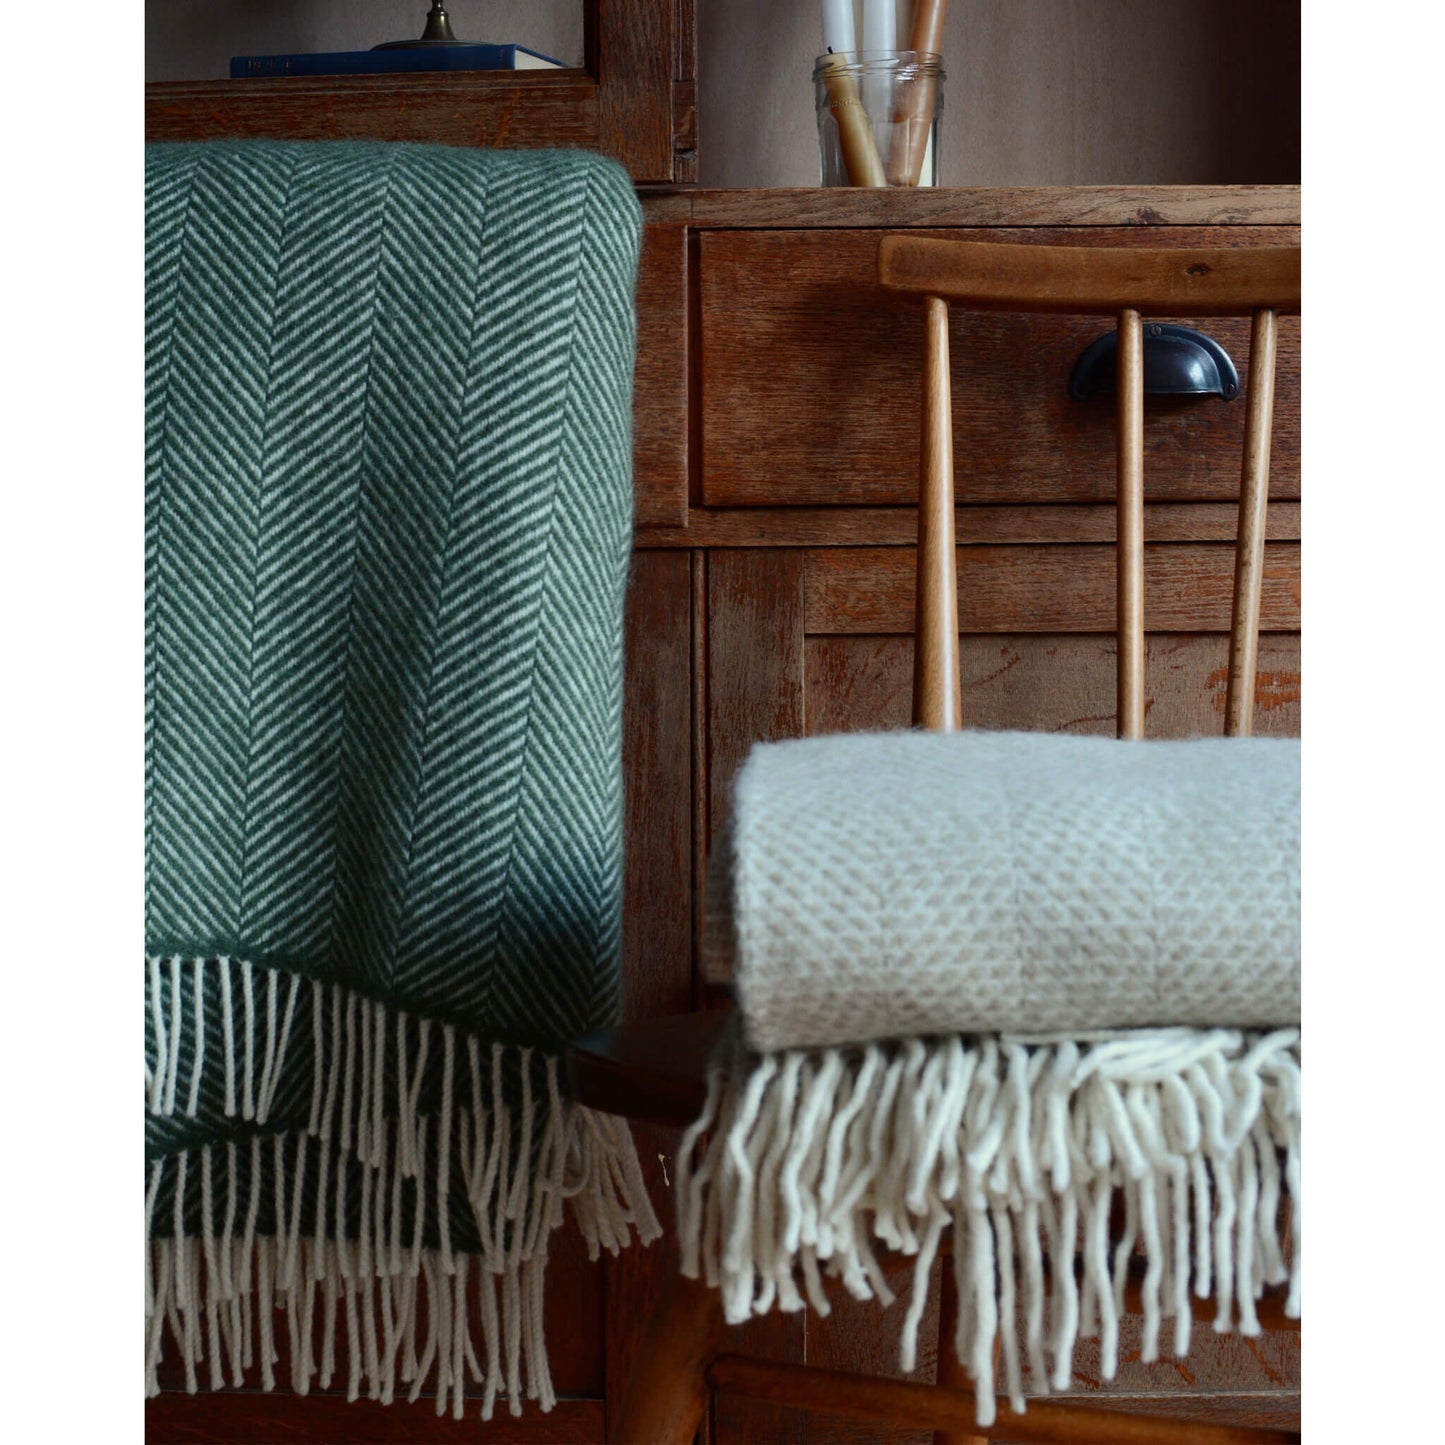 Detail shot of an olive green Tweedmill herringbone wool throw, shown next to an oatmeal throw on top of a chair.